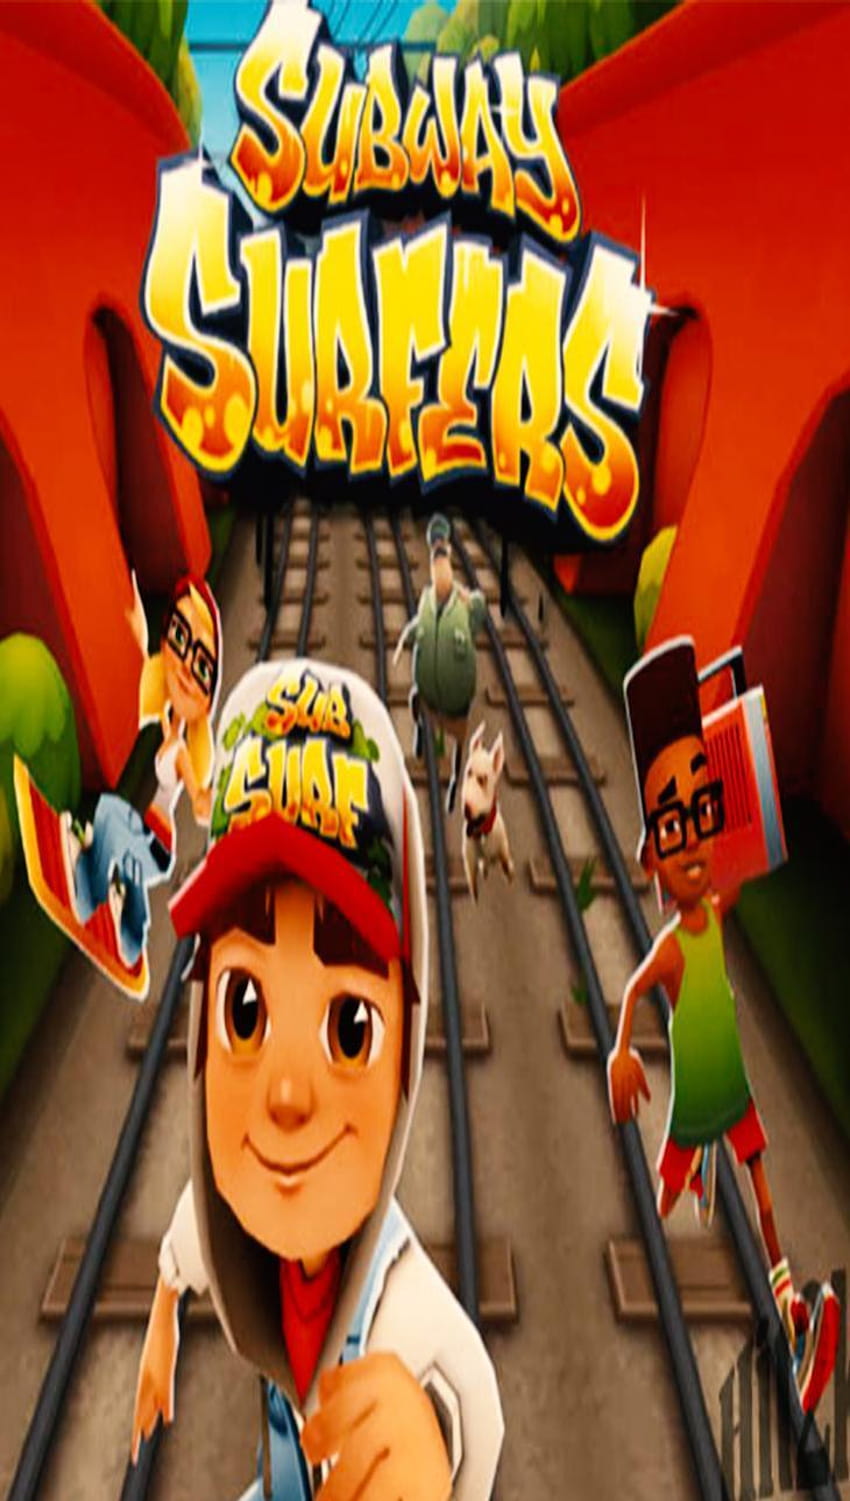 Subway Surfer for Android, subway surfers games HD phone wallpaper